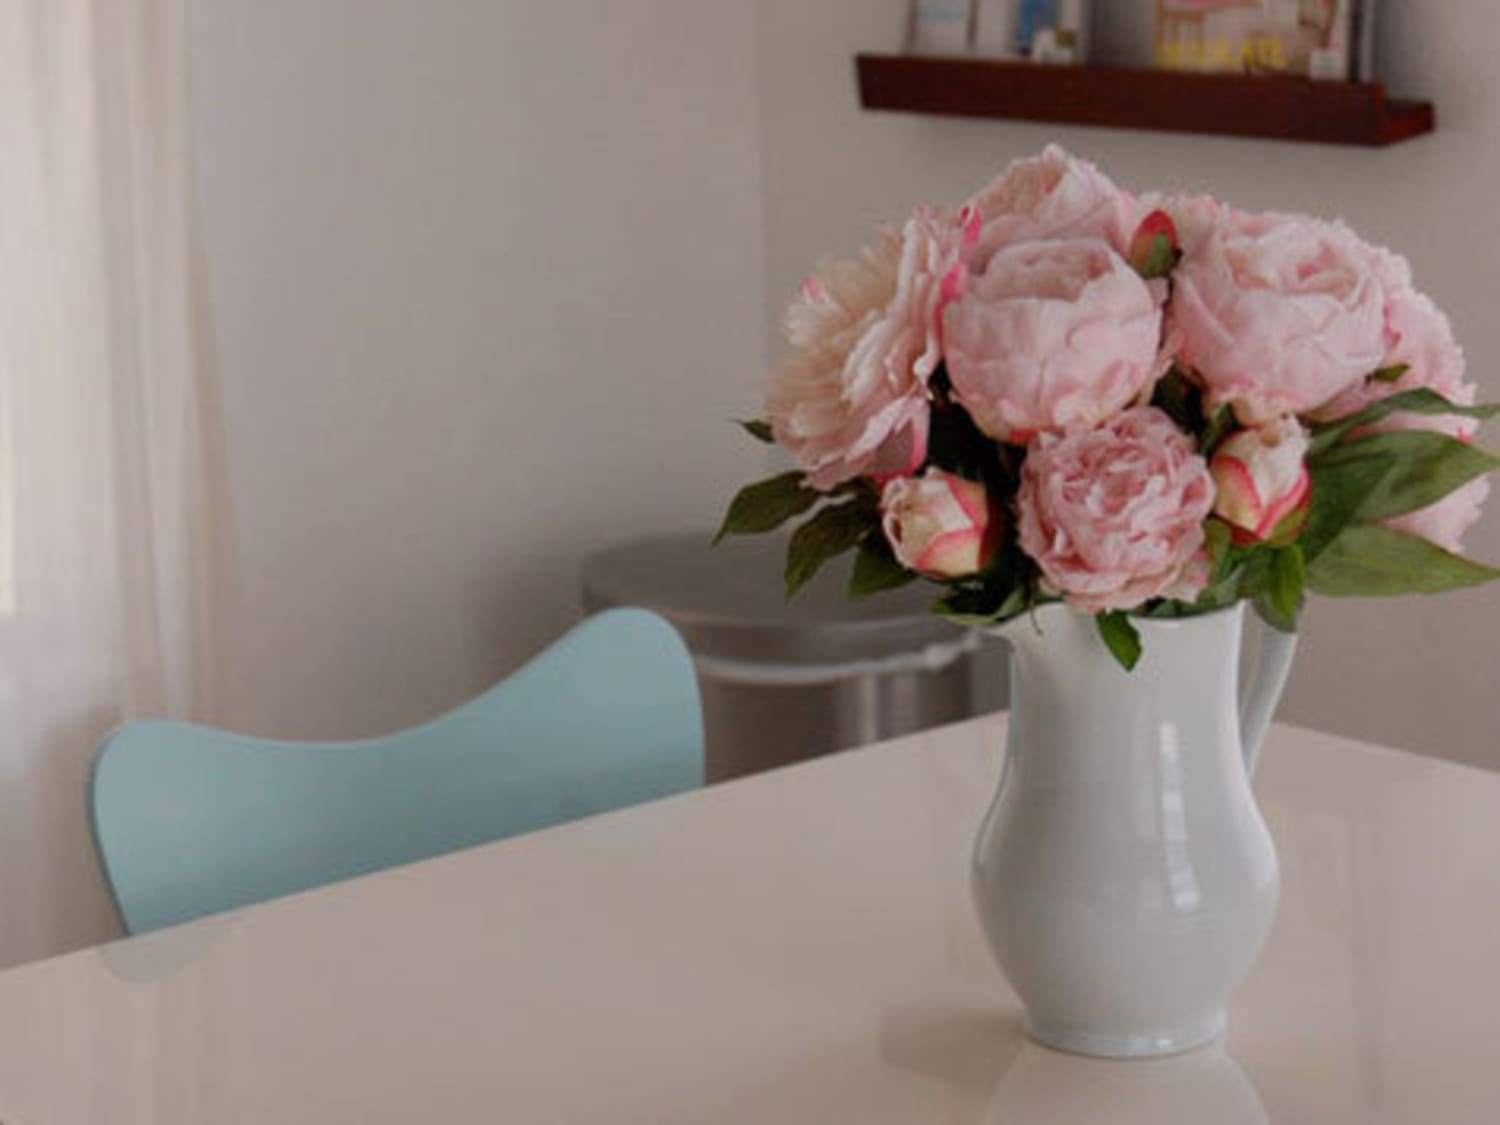 How to Make Fake Flower Arrangements as Pretty as the Real Thing